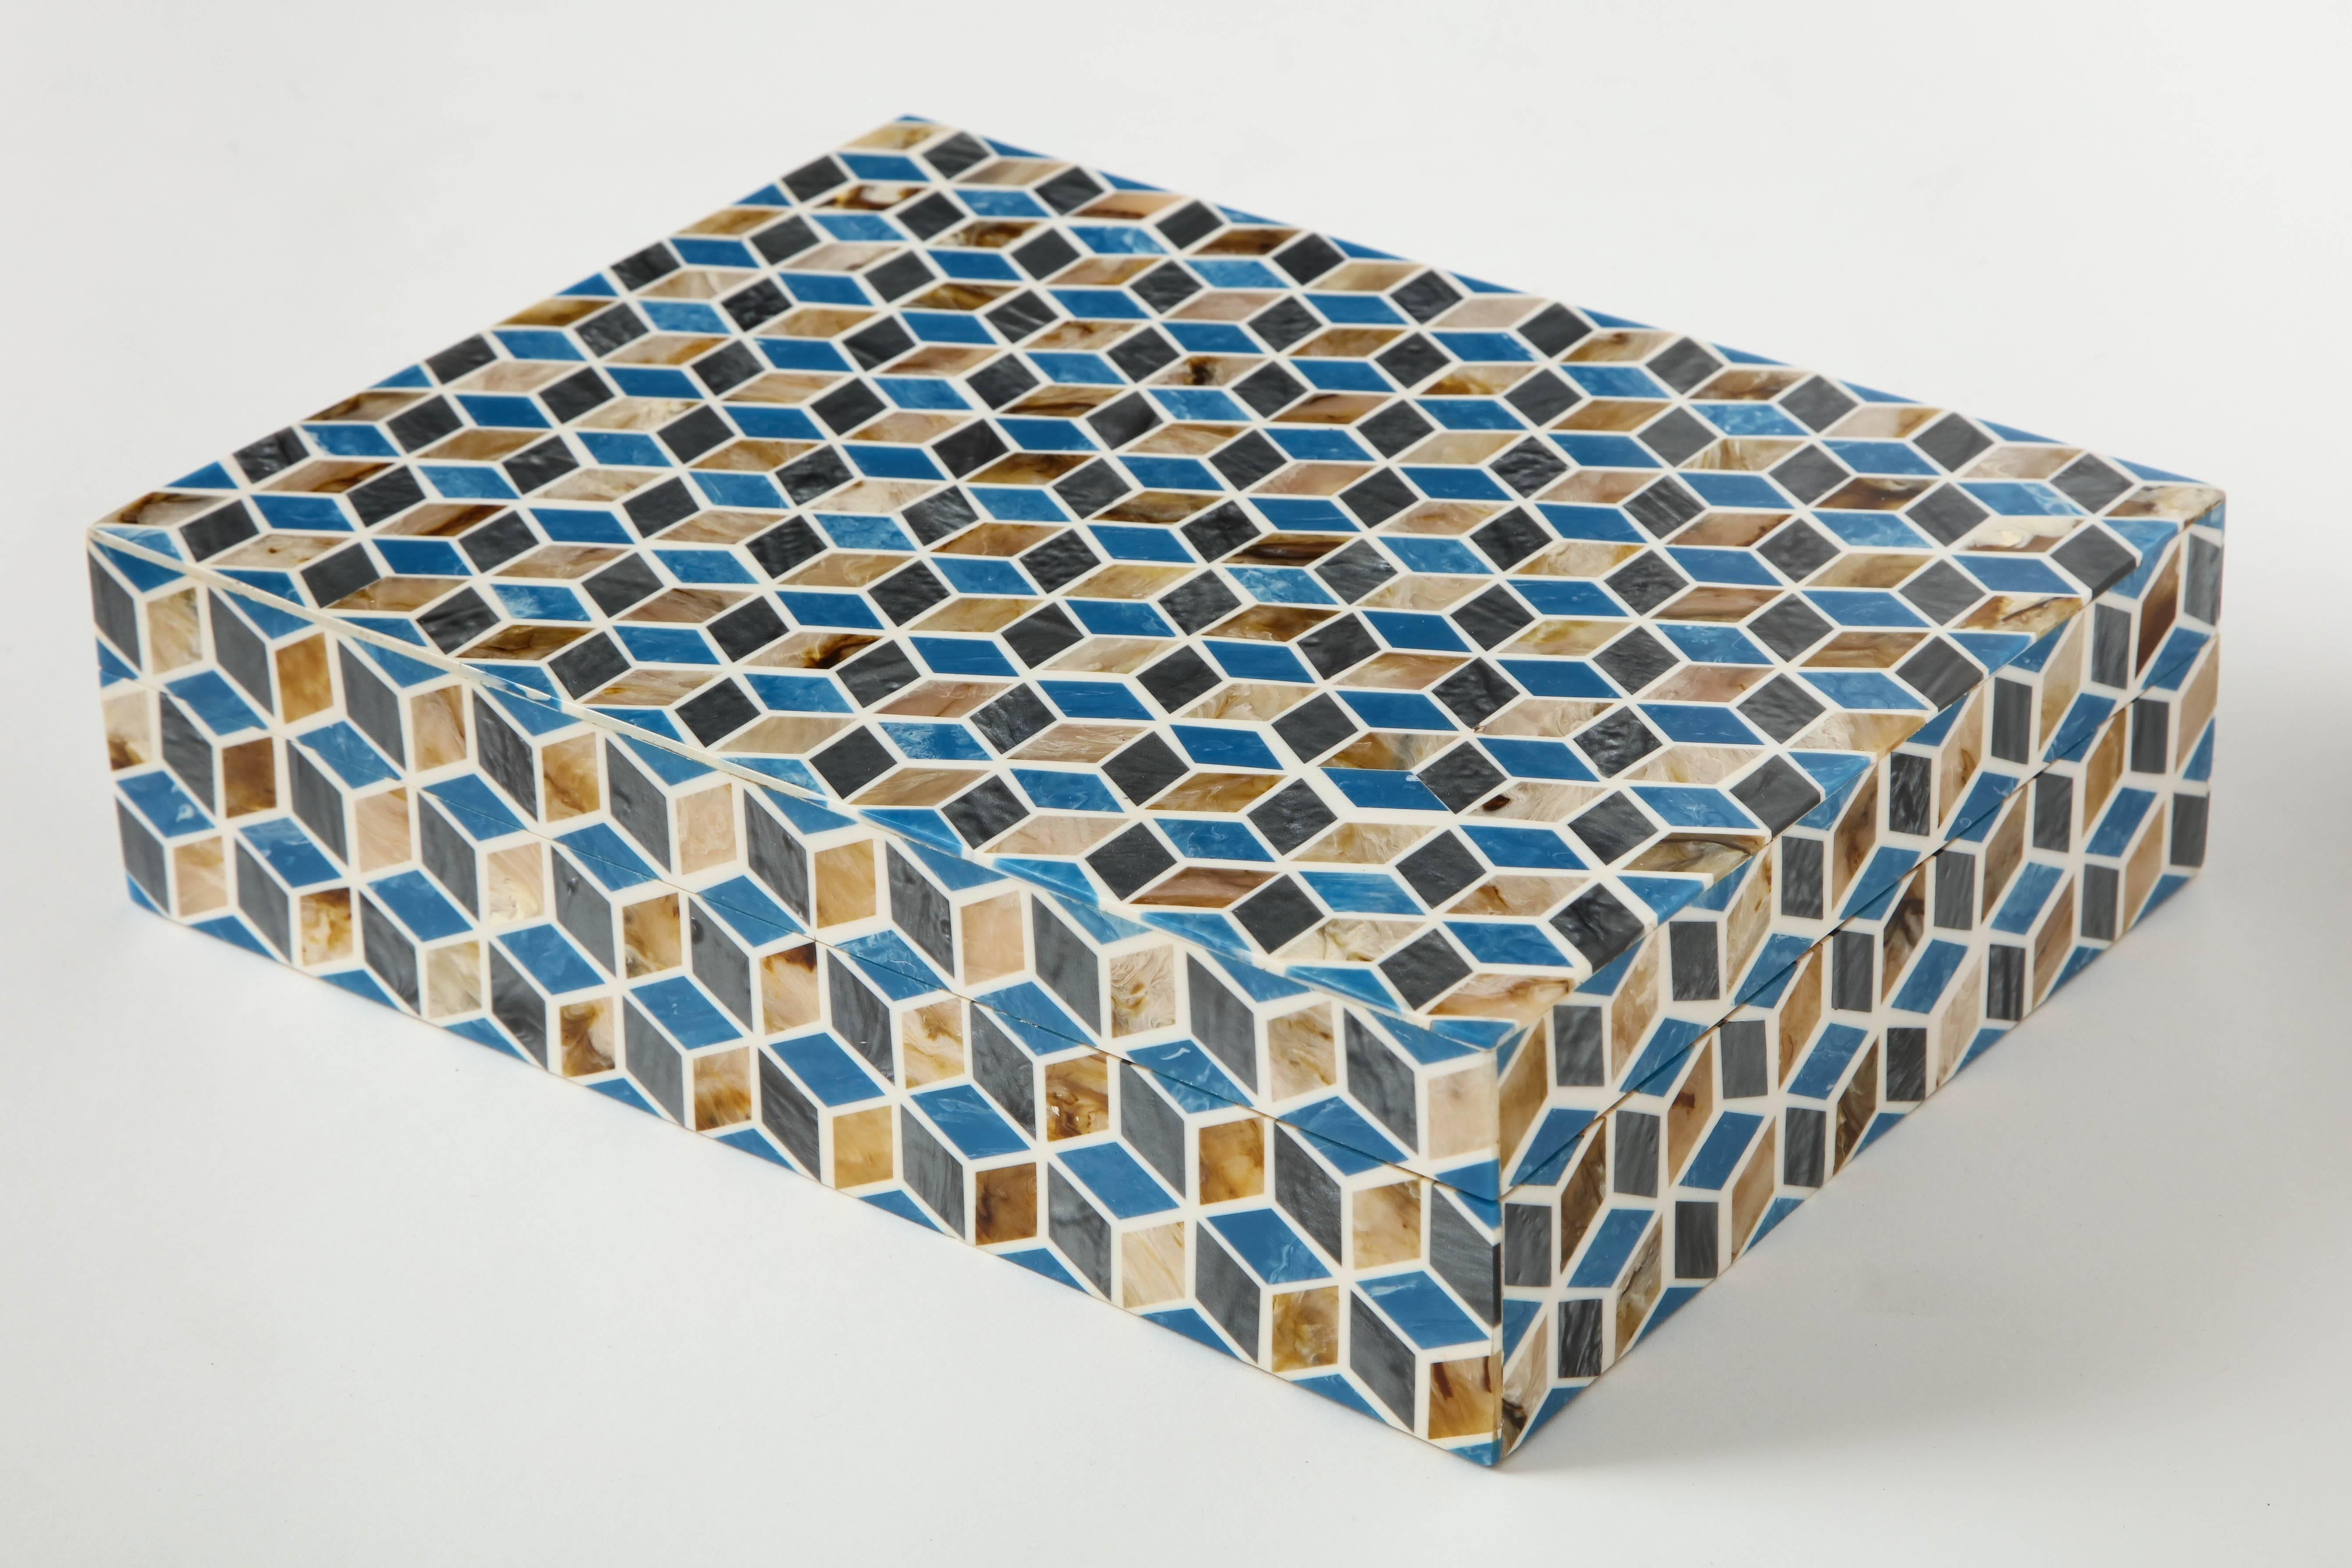 Bone geometric Inlay box featuring a wood lined interior and blue, brown and sand colored tiles.